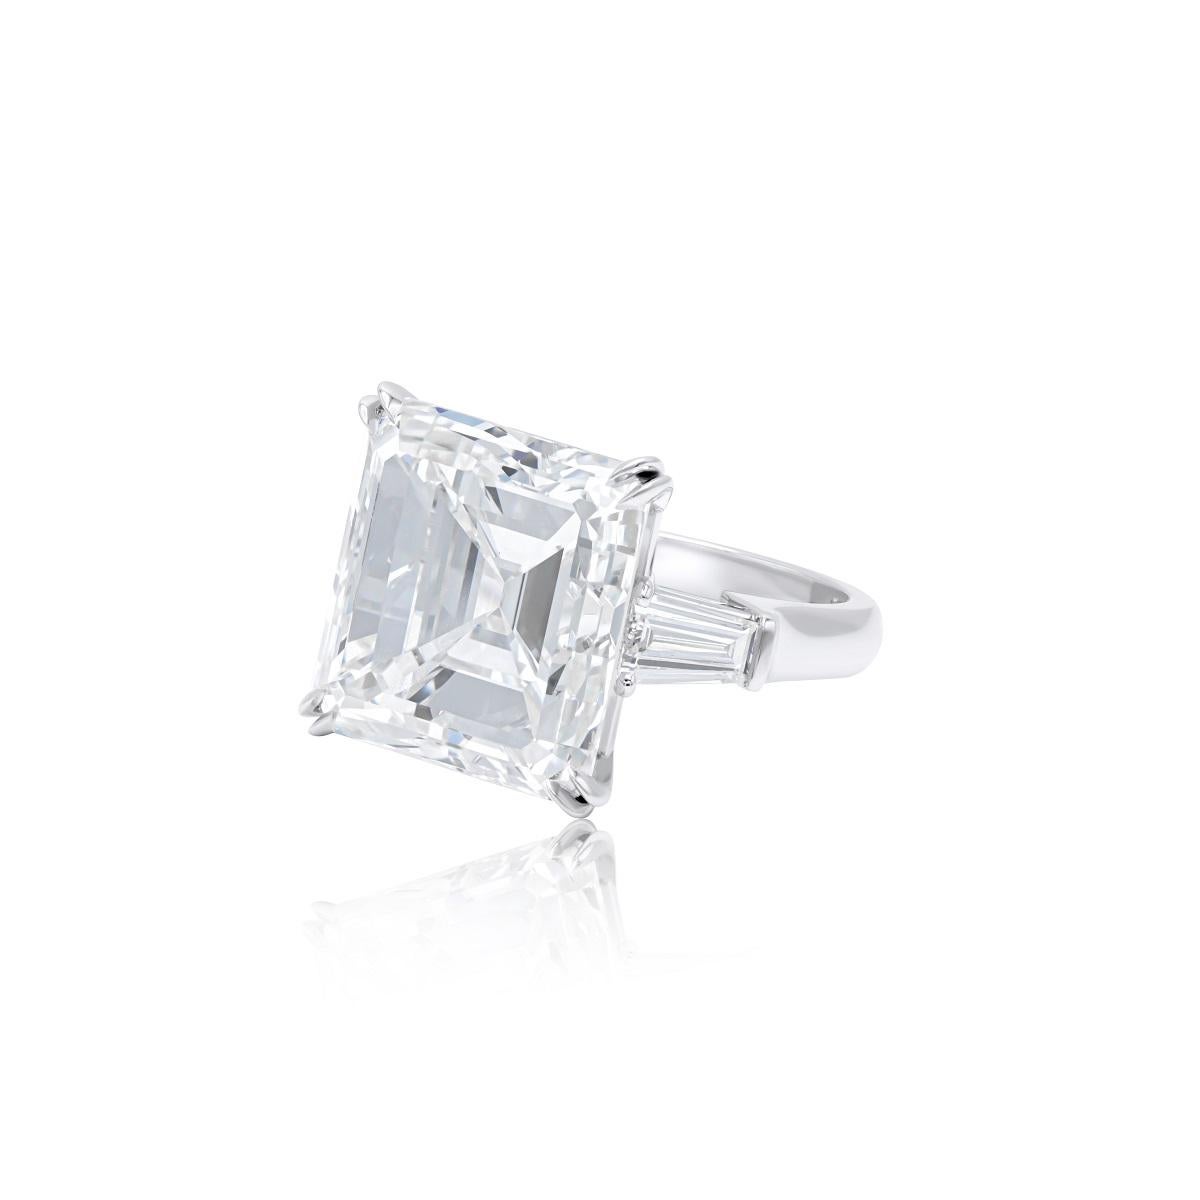 Platinum engagement ring featuring a center 18.01 ct GIA certified (H-VS2) emerald cut diamond(EMC527-CERTIFIED#2191613136) with 1.00 cts tw of tapered baguette cut diamonds on each side
Diana M is one-stop shop for all your jewelry shopping,